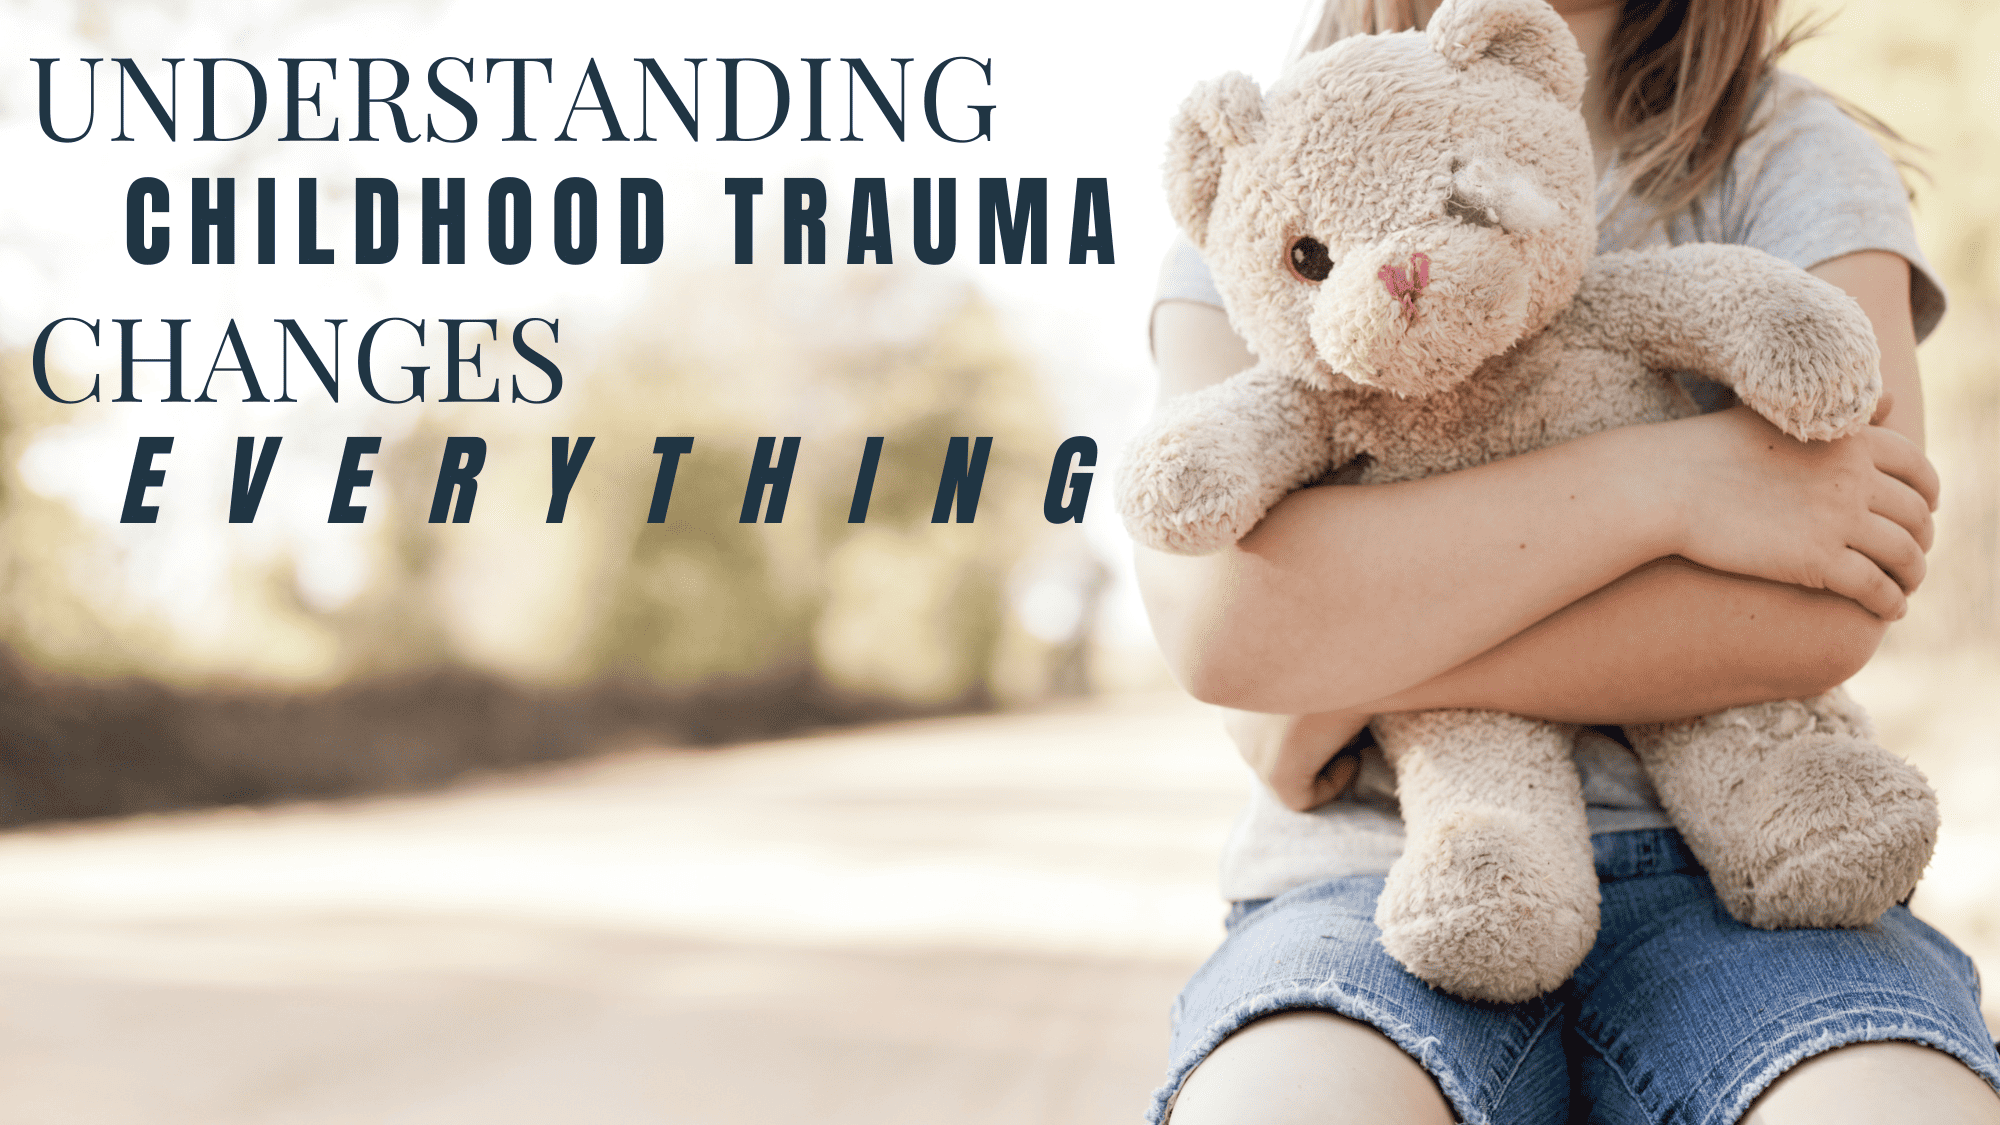 Image showing that understanding childhood trauma changes everything.